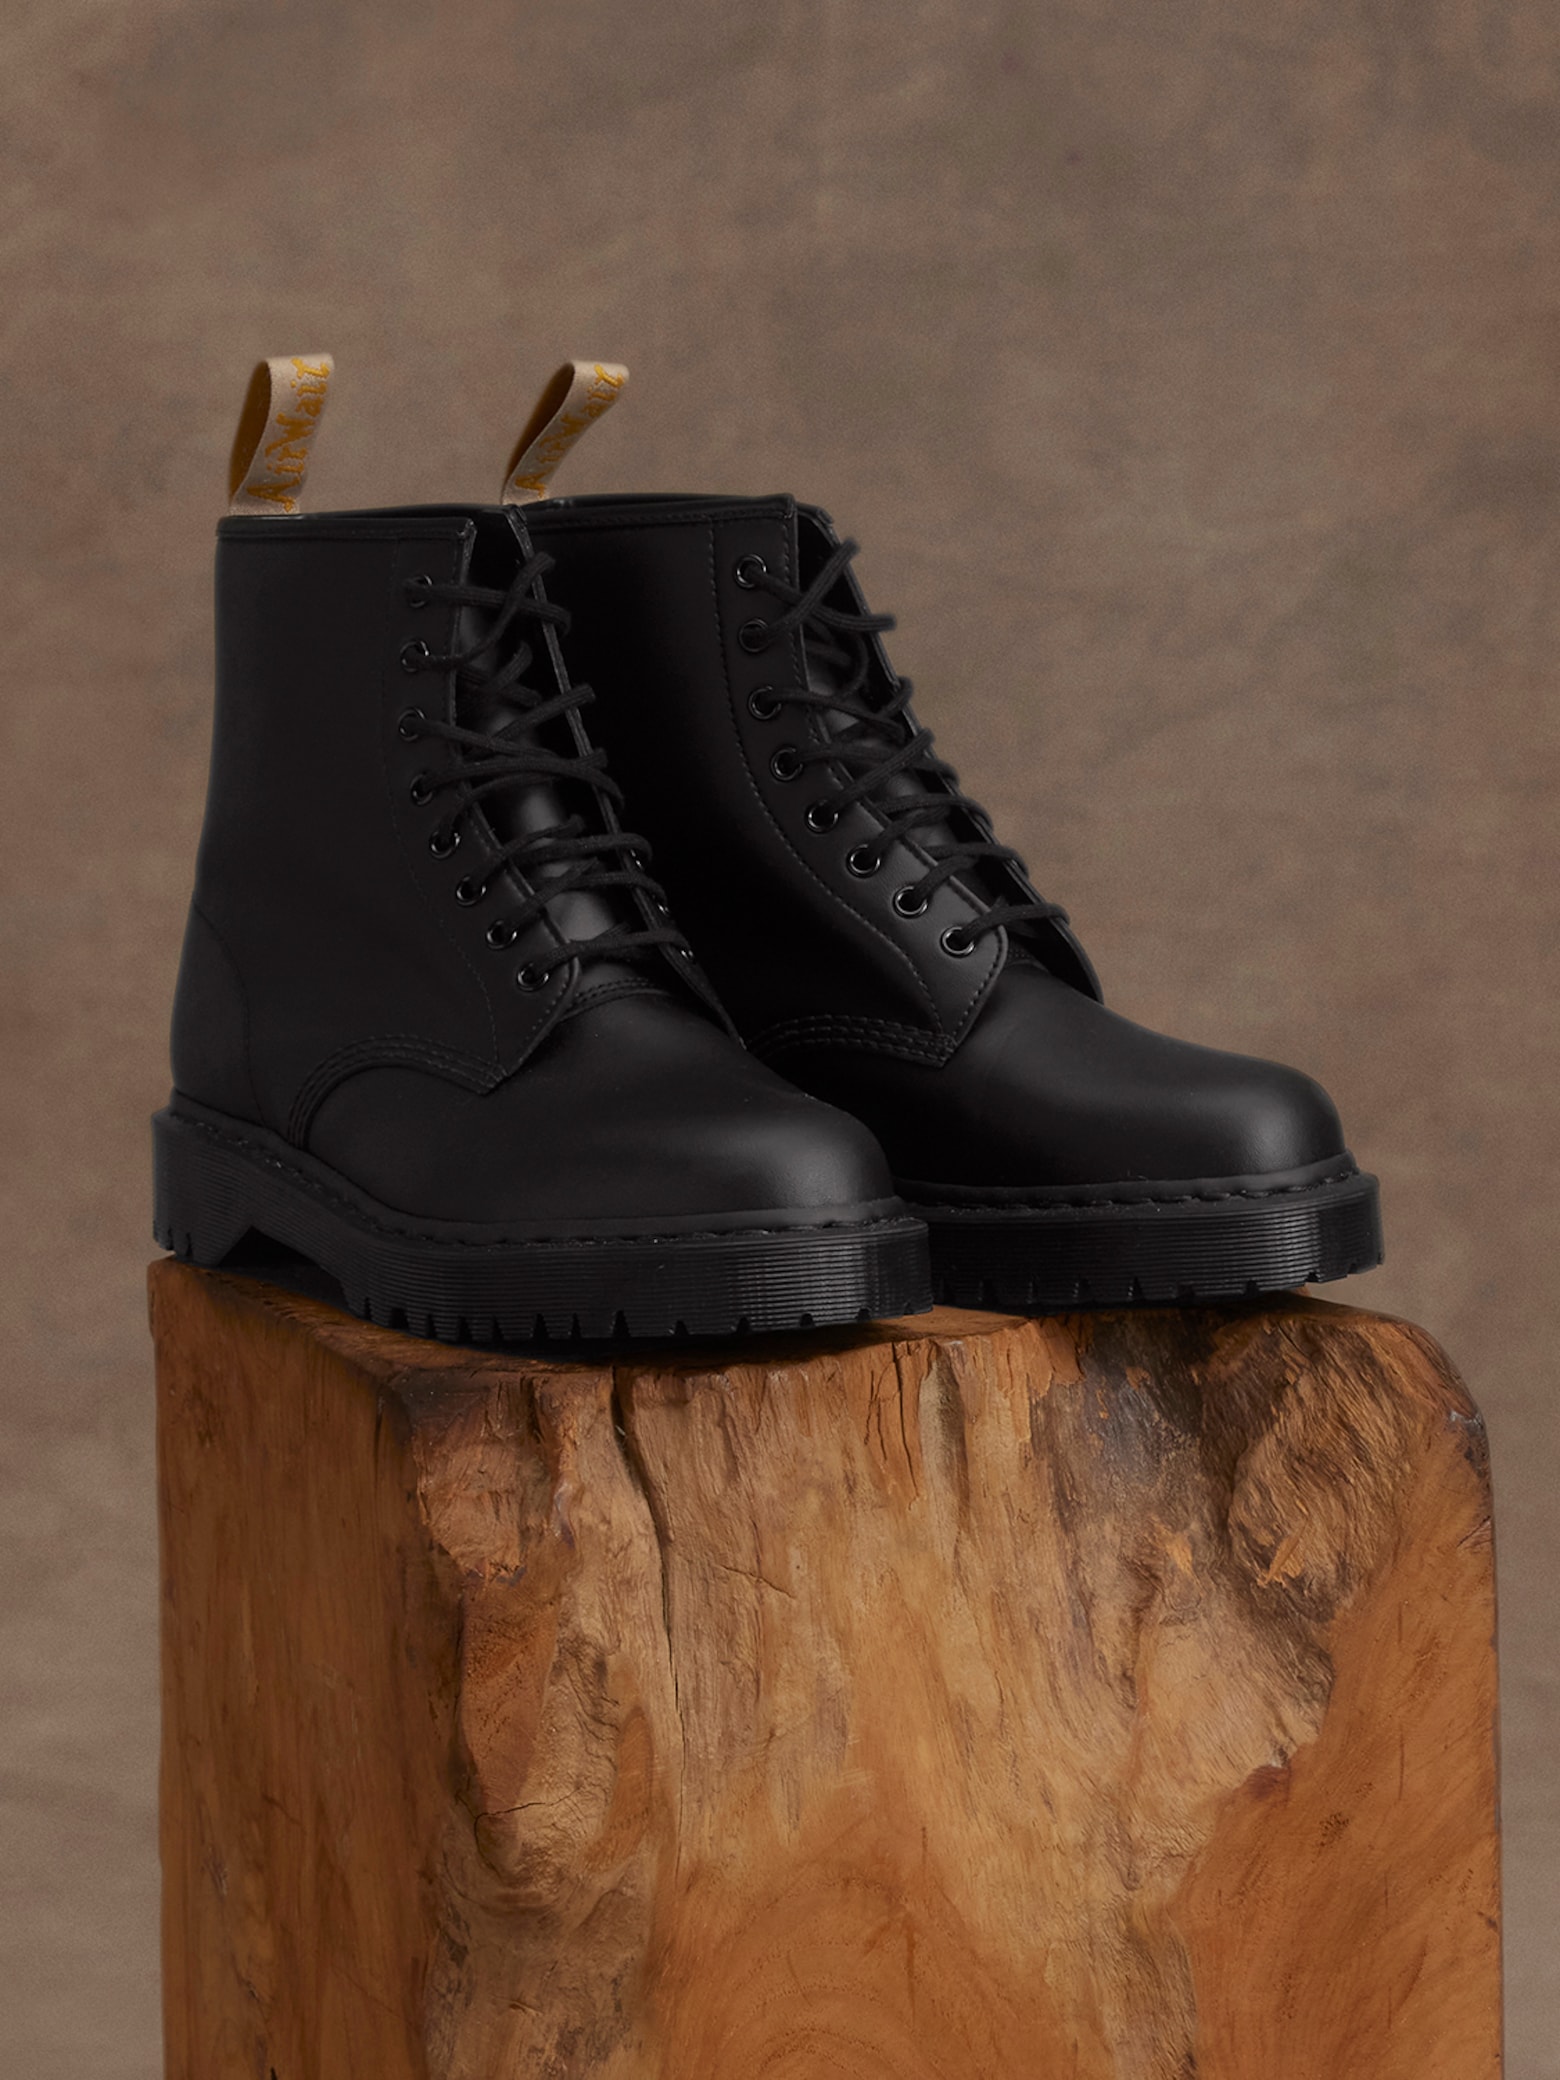 Outerwear bis Chelsea-Stiefel Trend-Boots